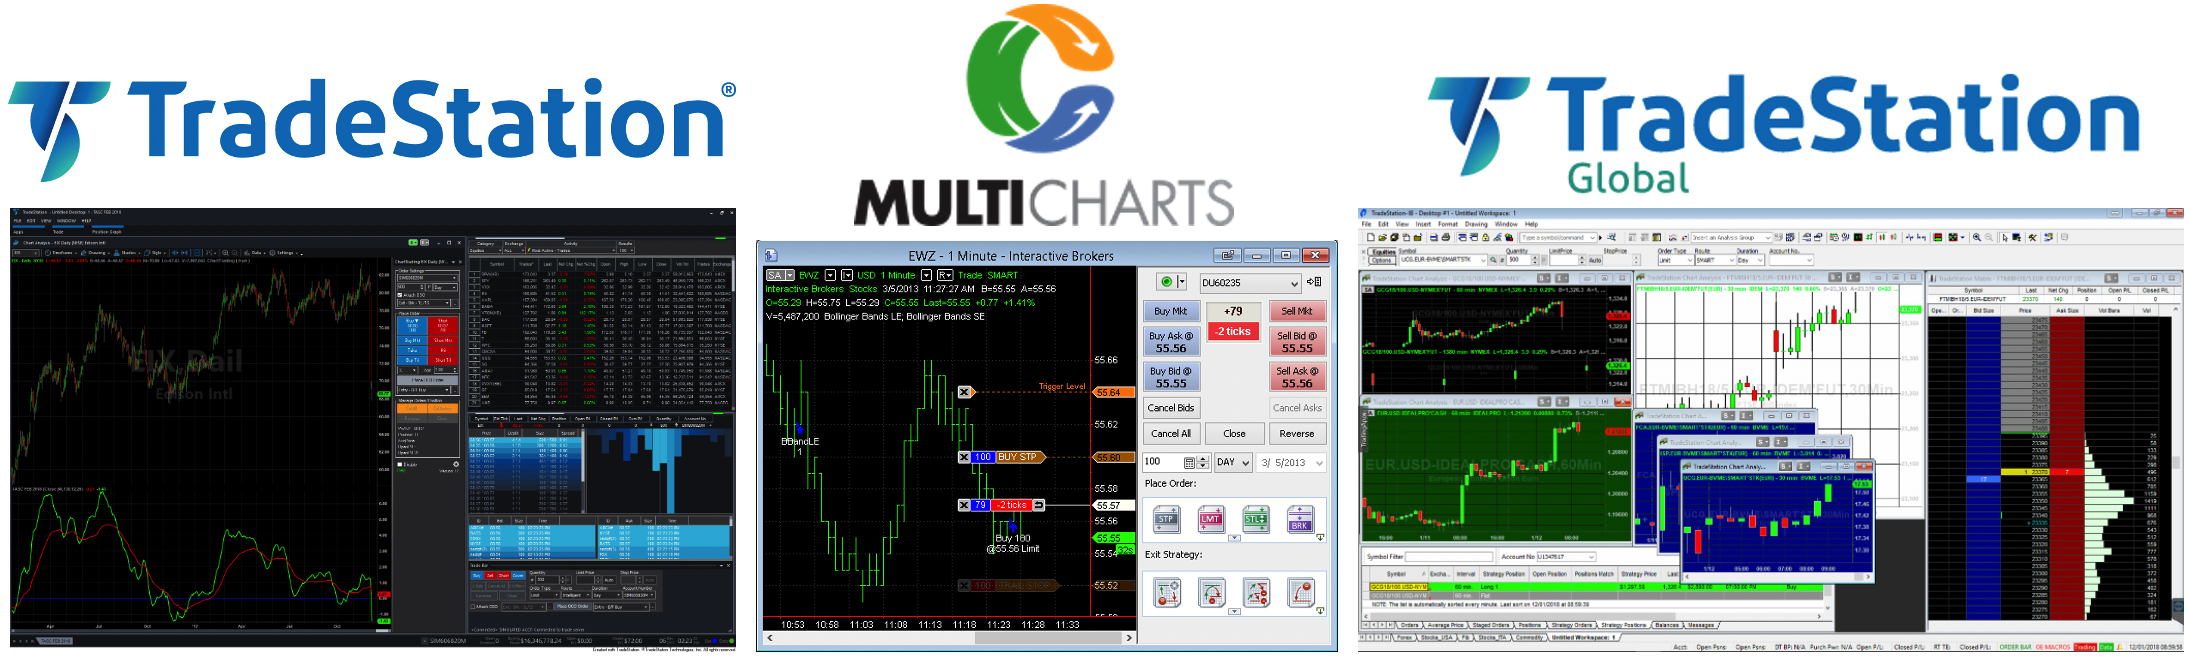 software corso intraday trading system: strategie trading intraday, trading automatico, intraday trading futures 